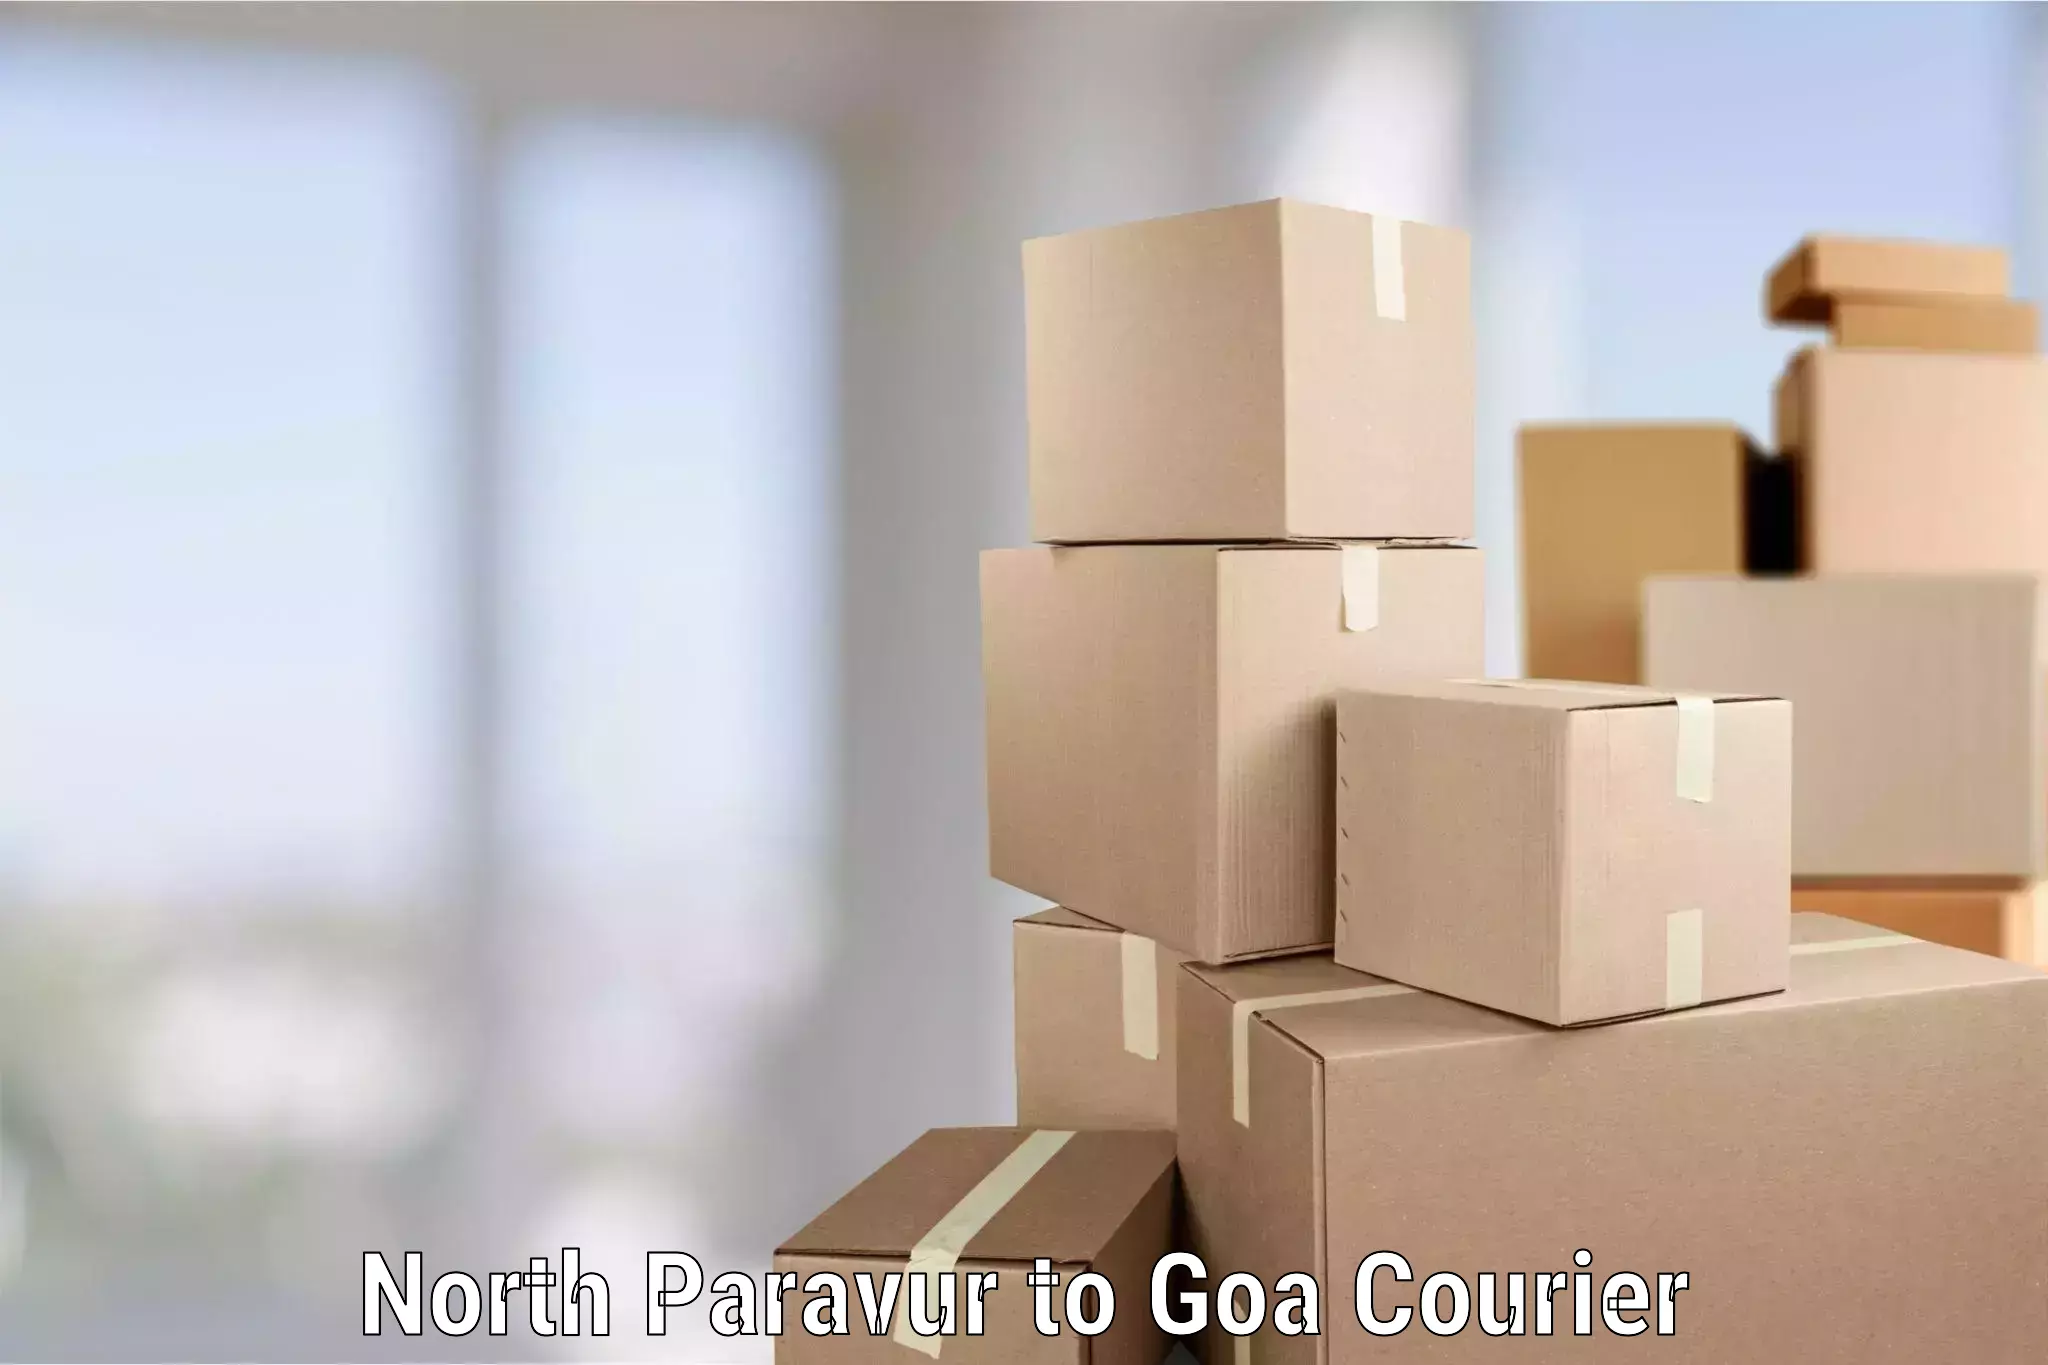 Professional moving assistance North Paravur to Goa